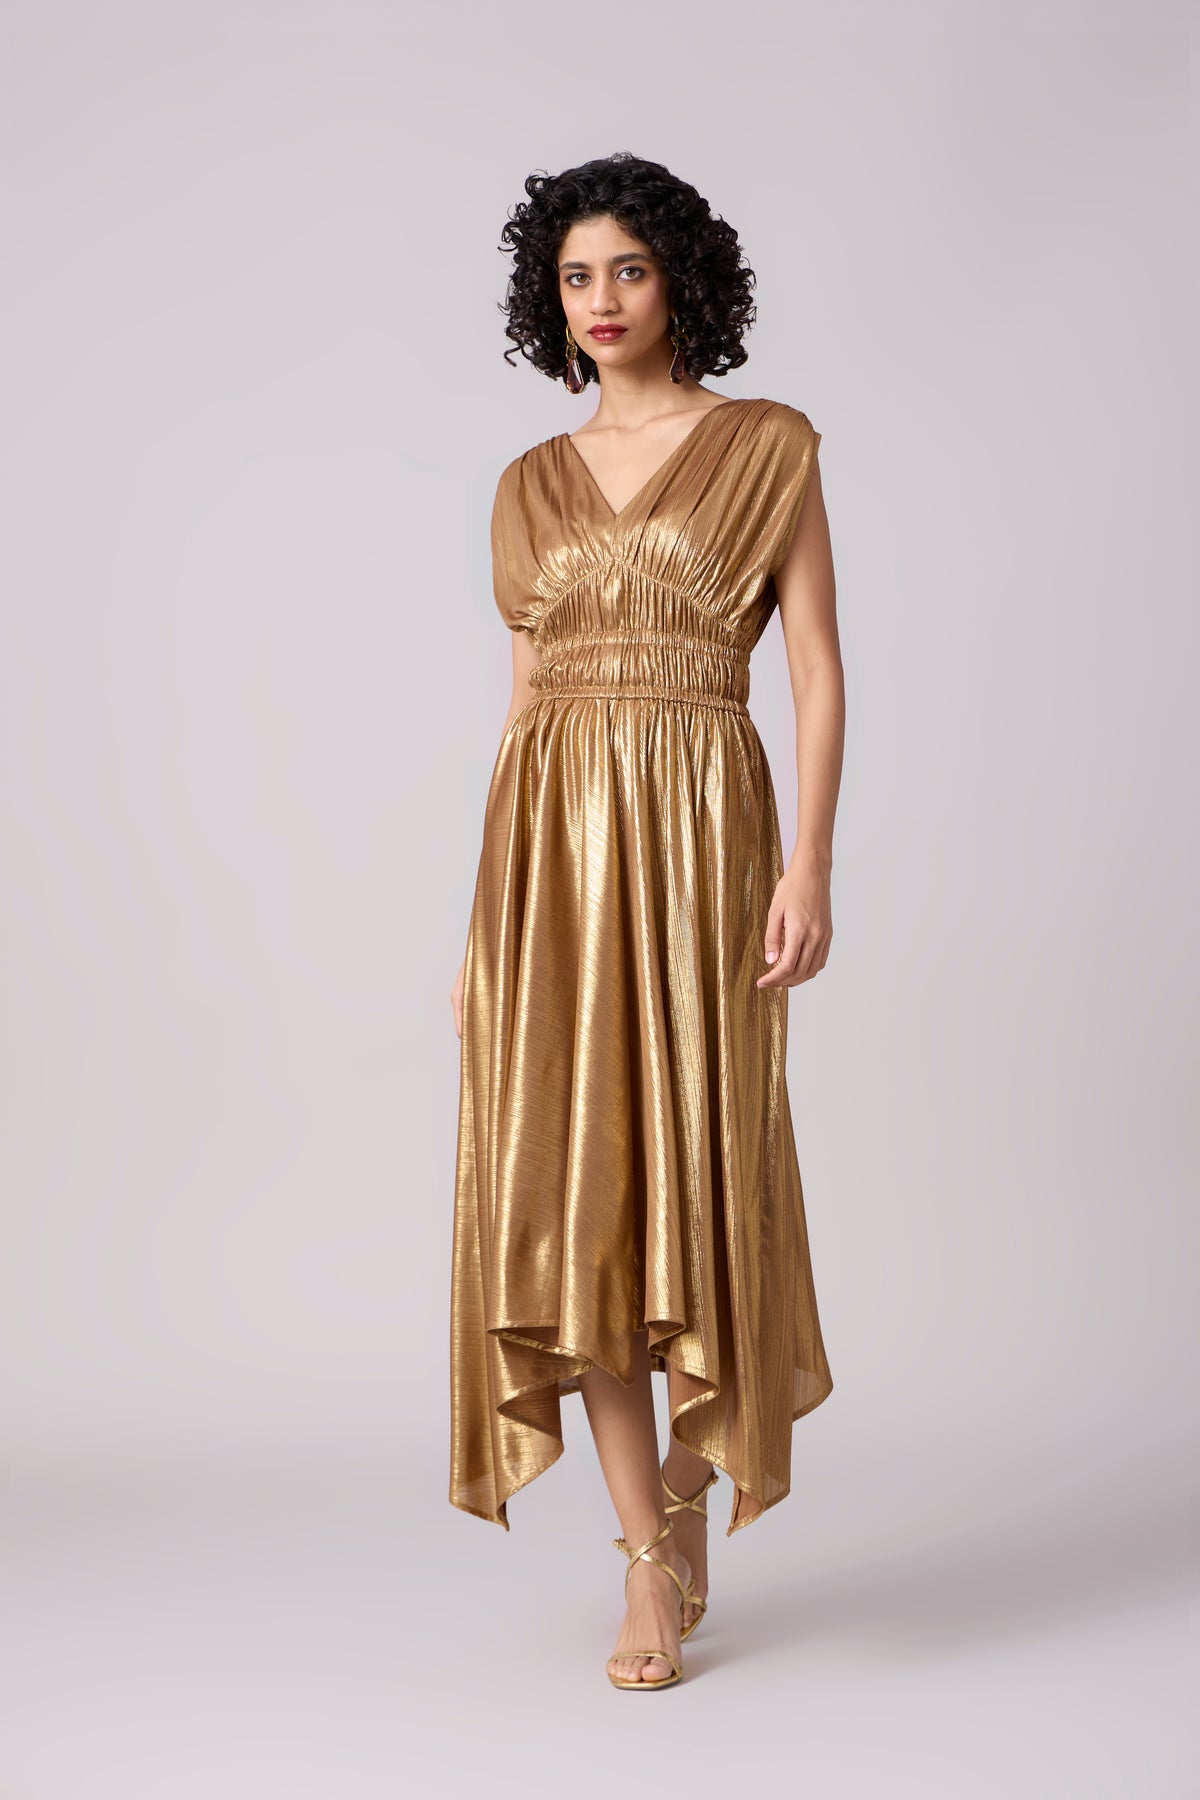 Zeina Rouched Dress -  Gold